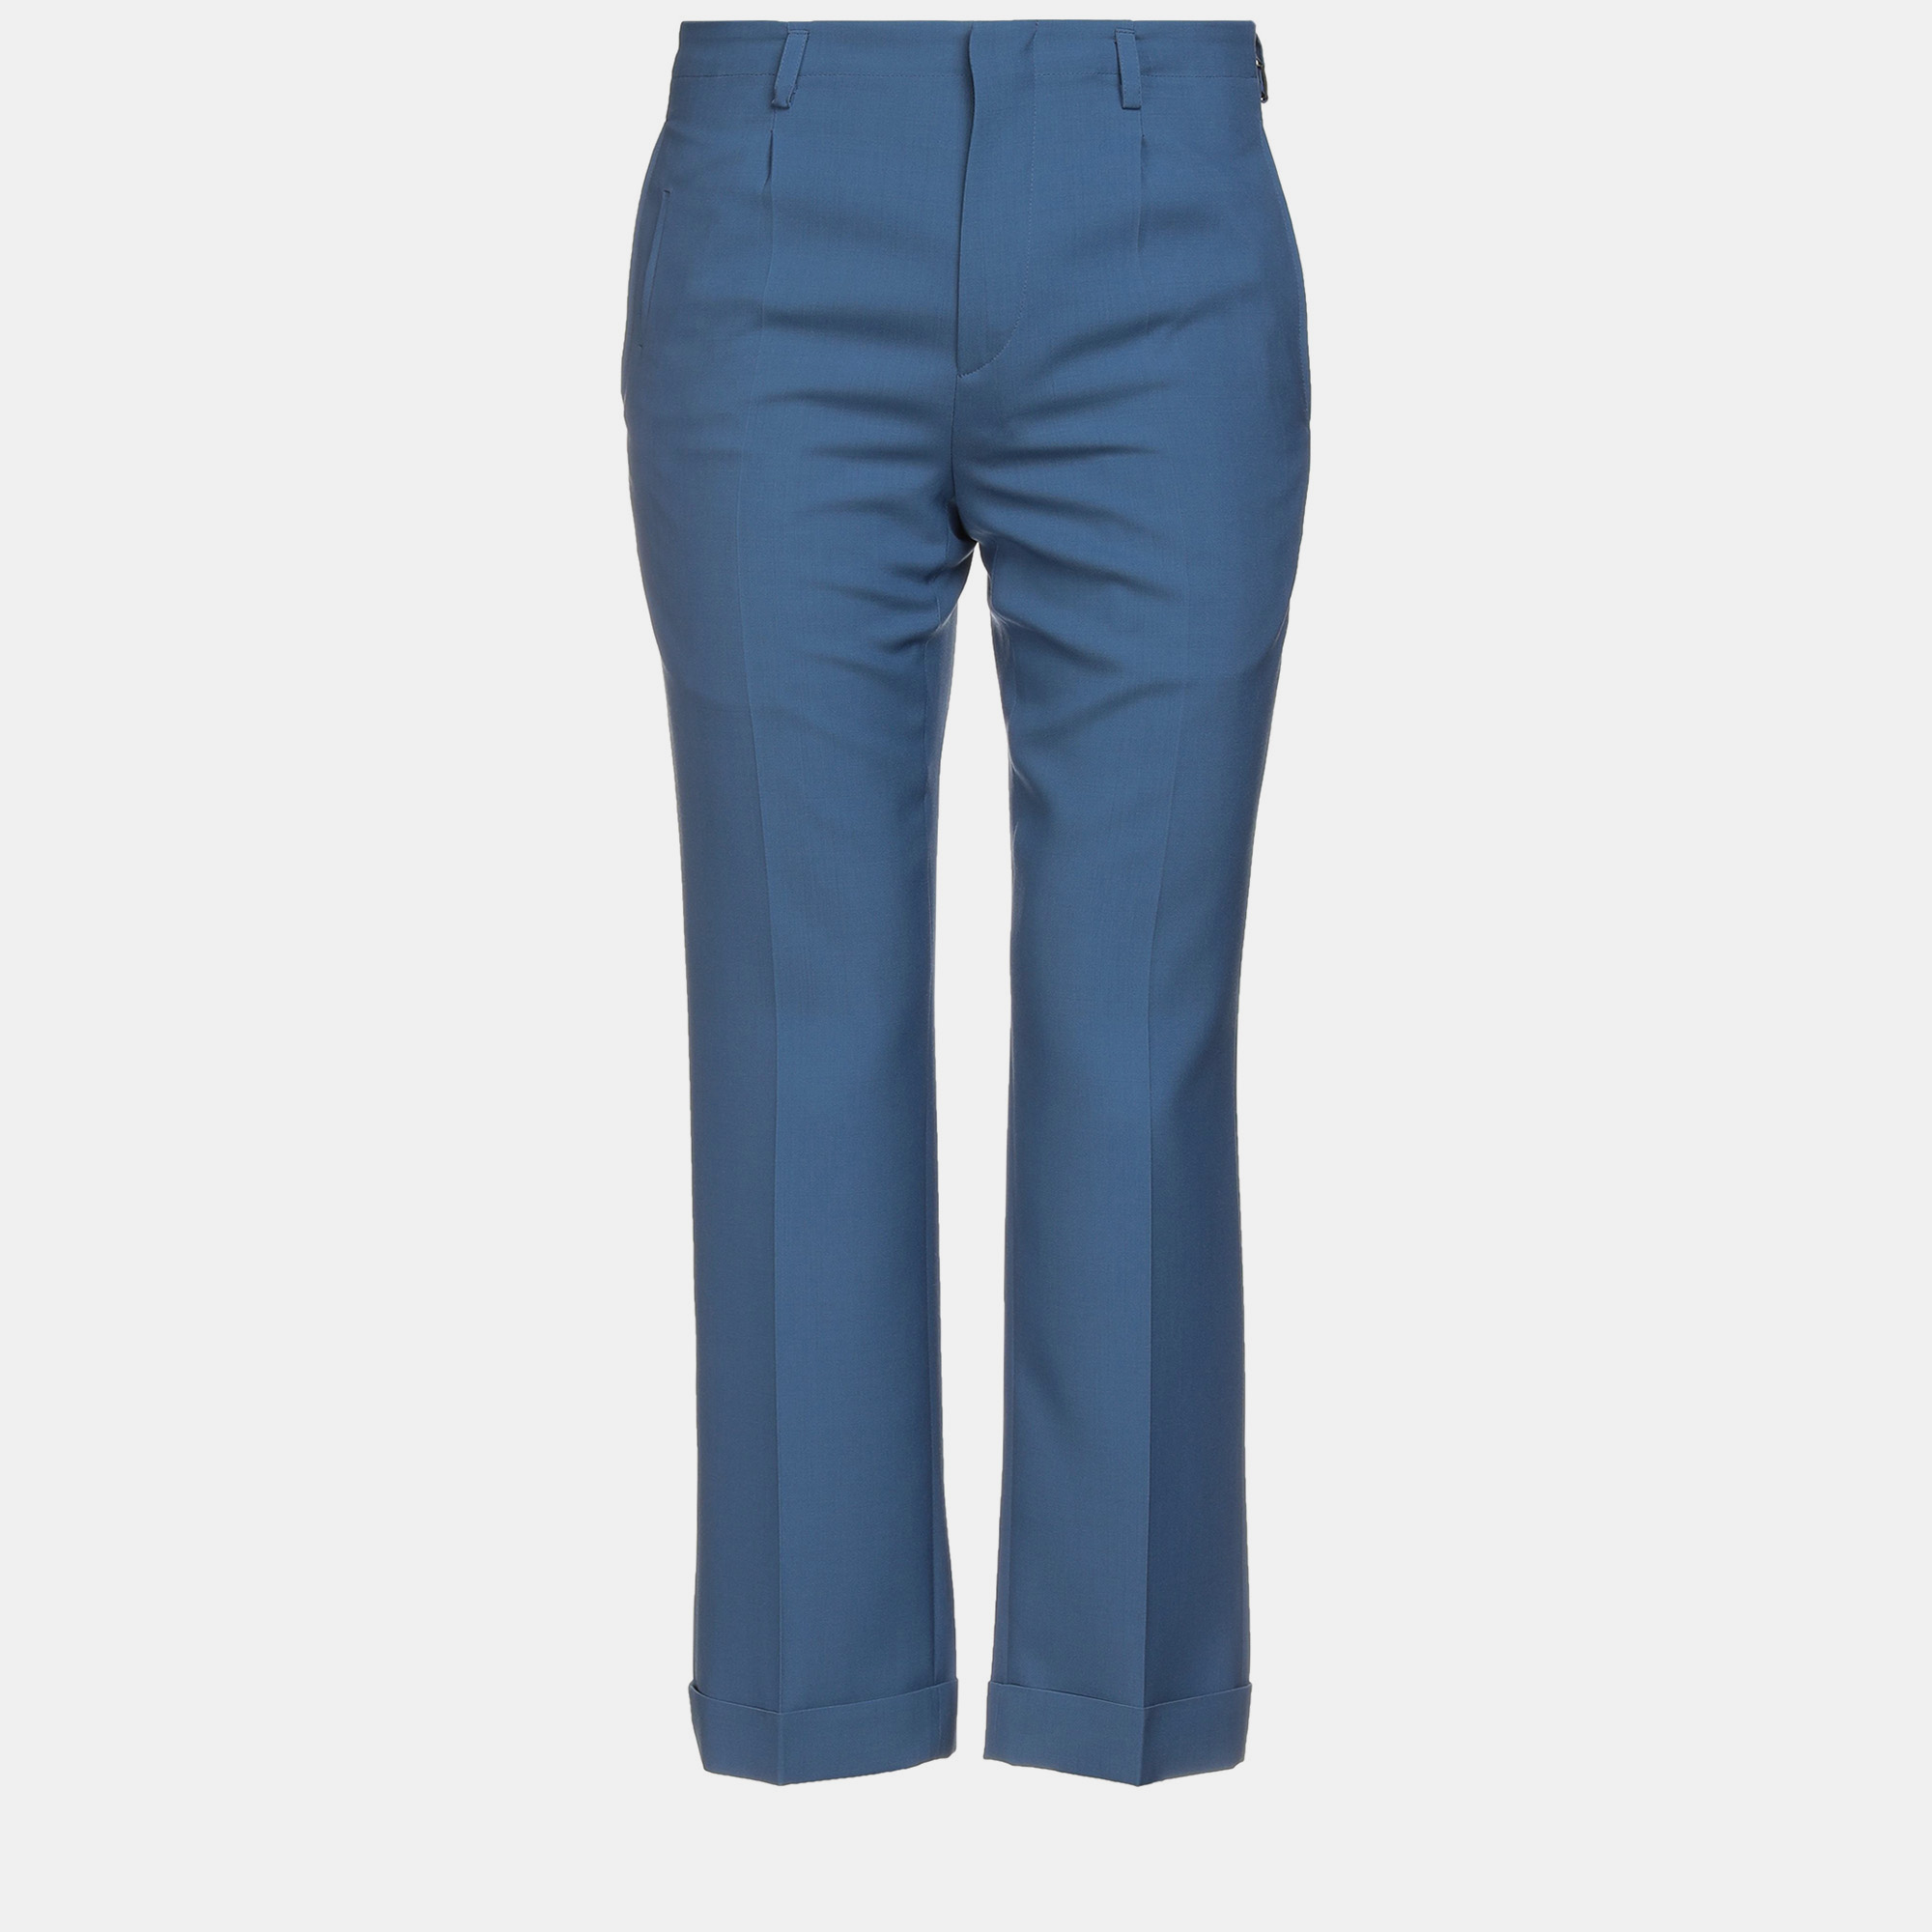 Givenchy blue wool trousers size 50